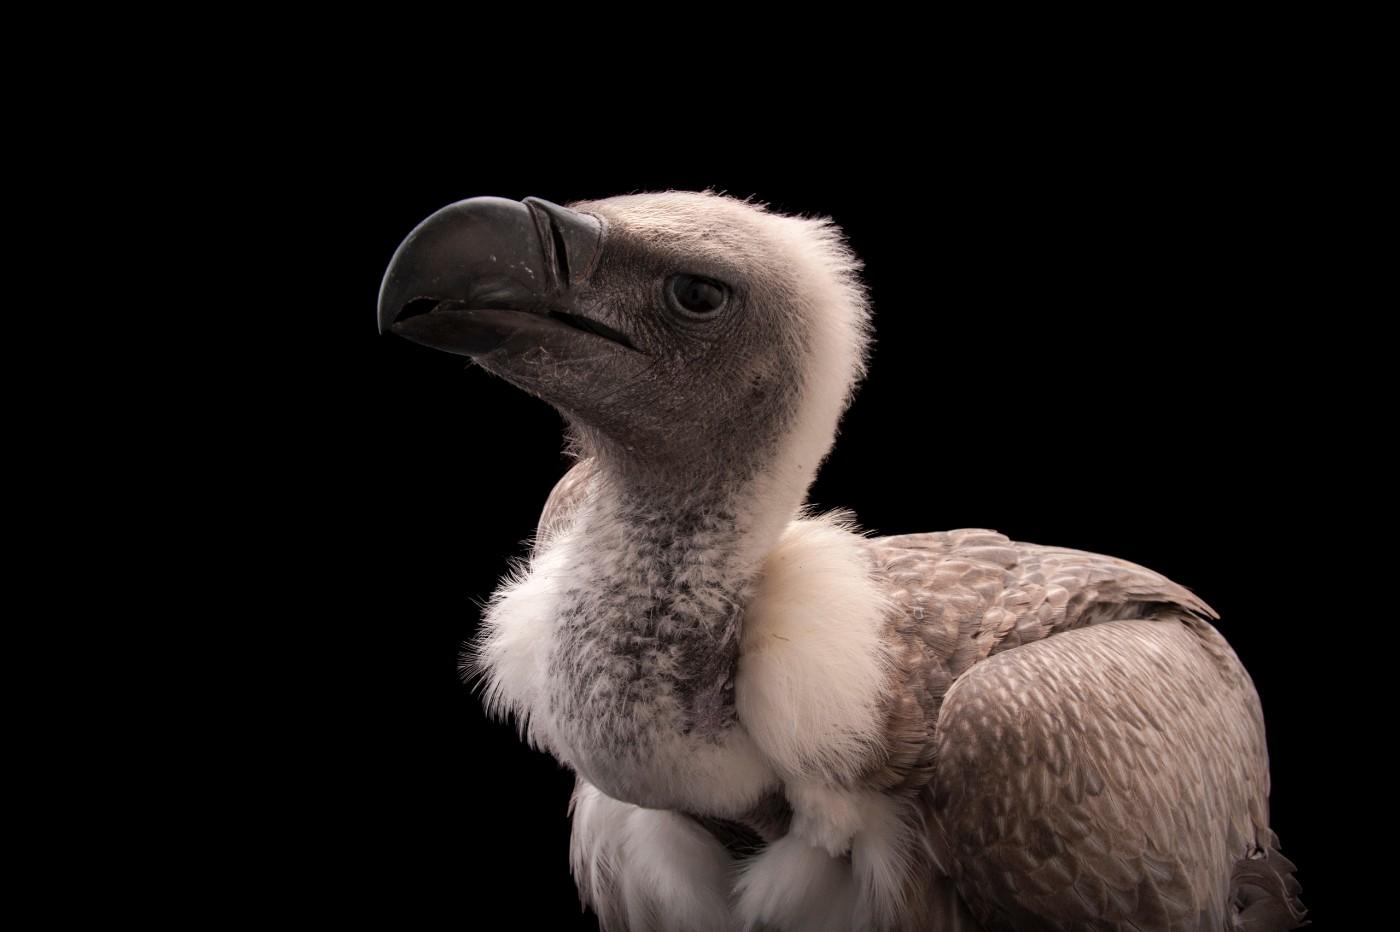 A critically endangered African white backed vulture, Gyps africanus, at the Cleveland Metroparks Zoo.